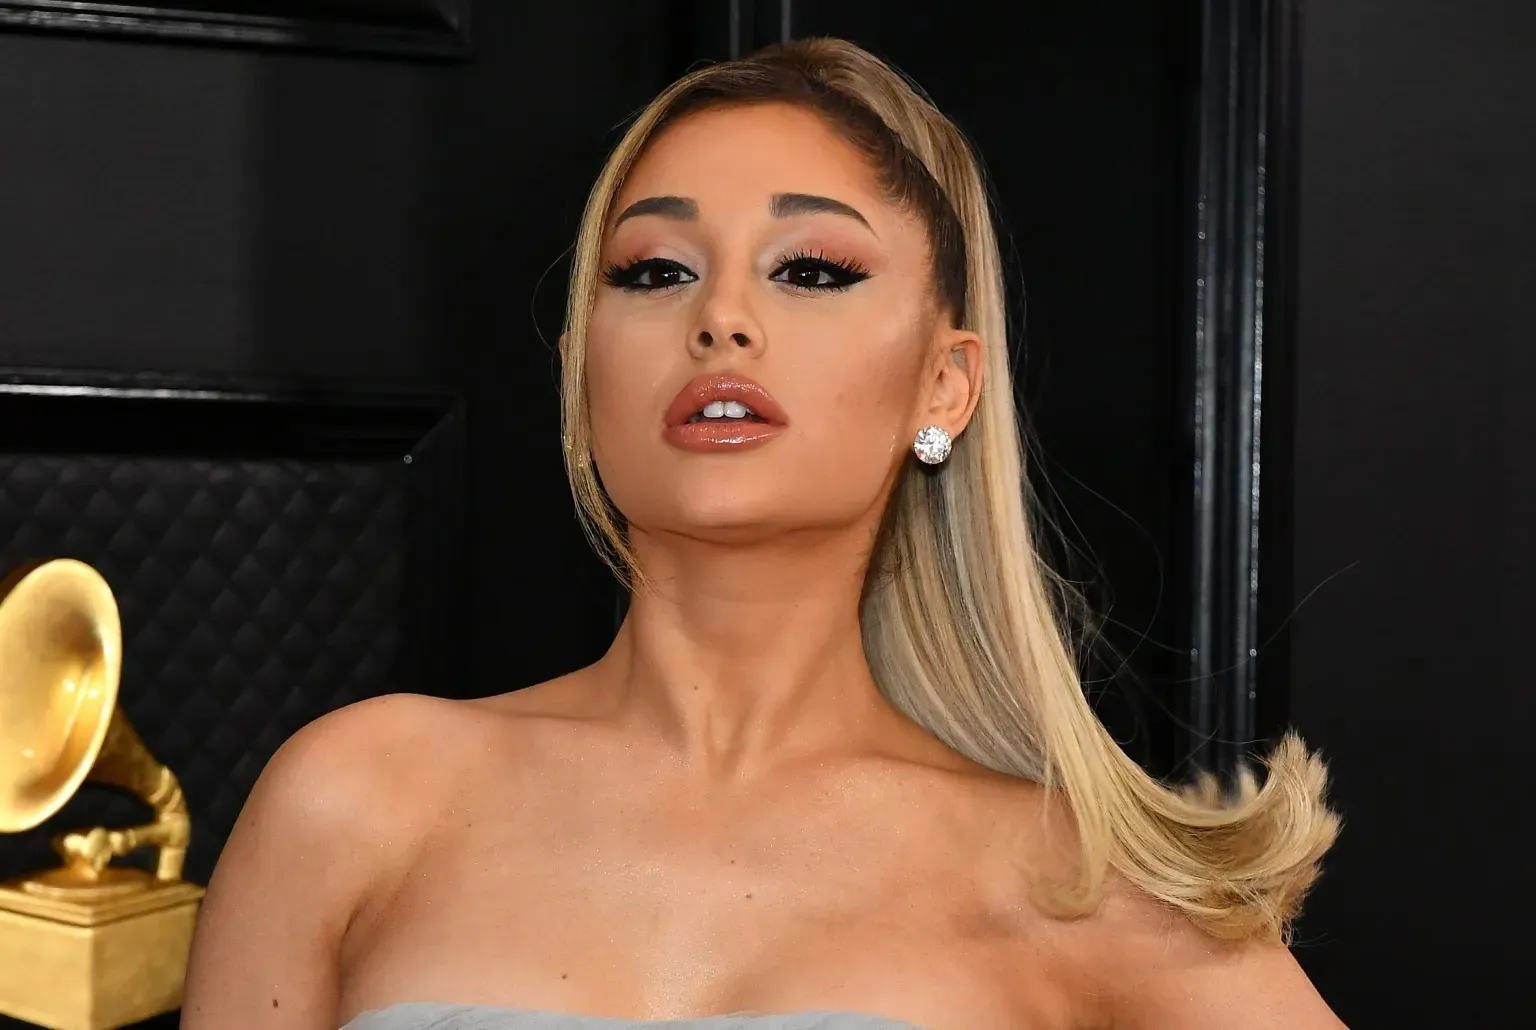 Ariana Grande got fed up with Botox and fillers She told everything for Vogue